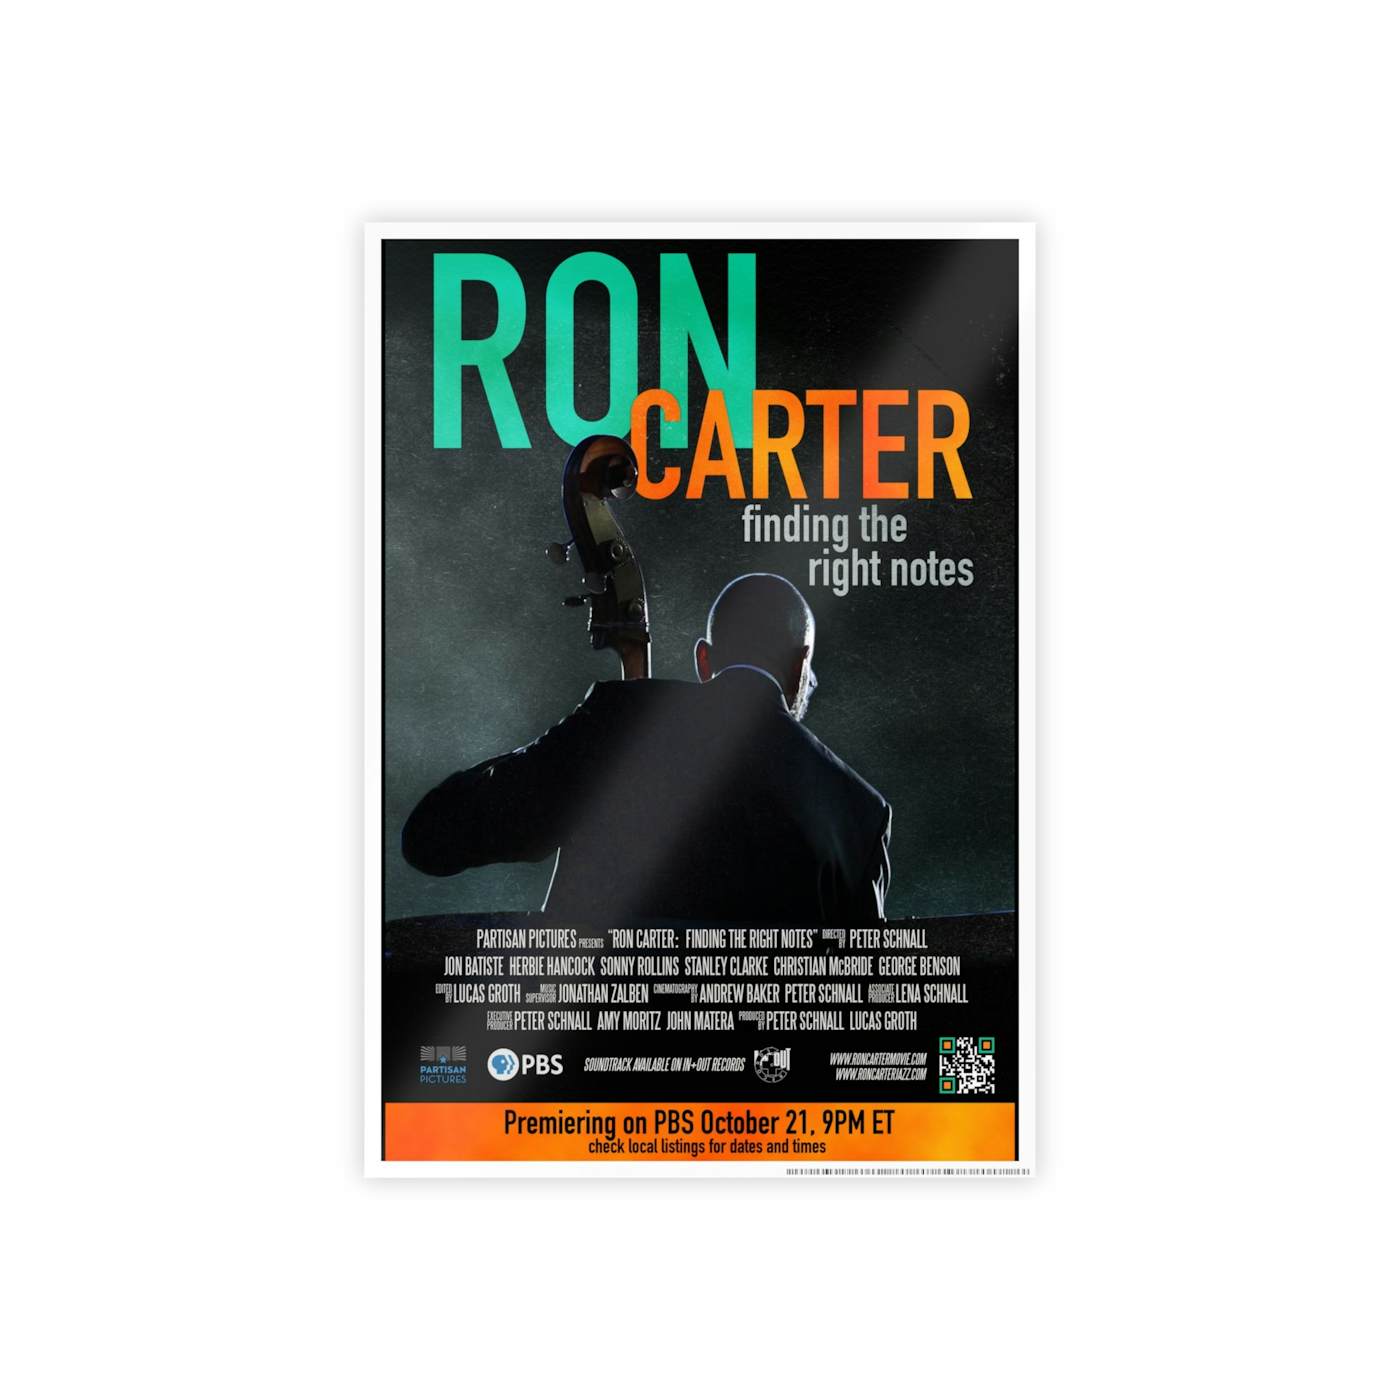 Ron Carter Finding the Right Notes Movie Poster